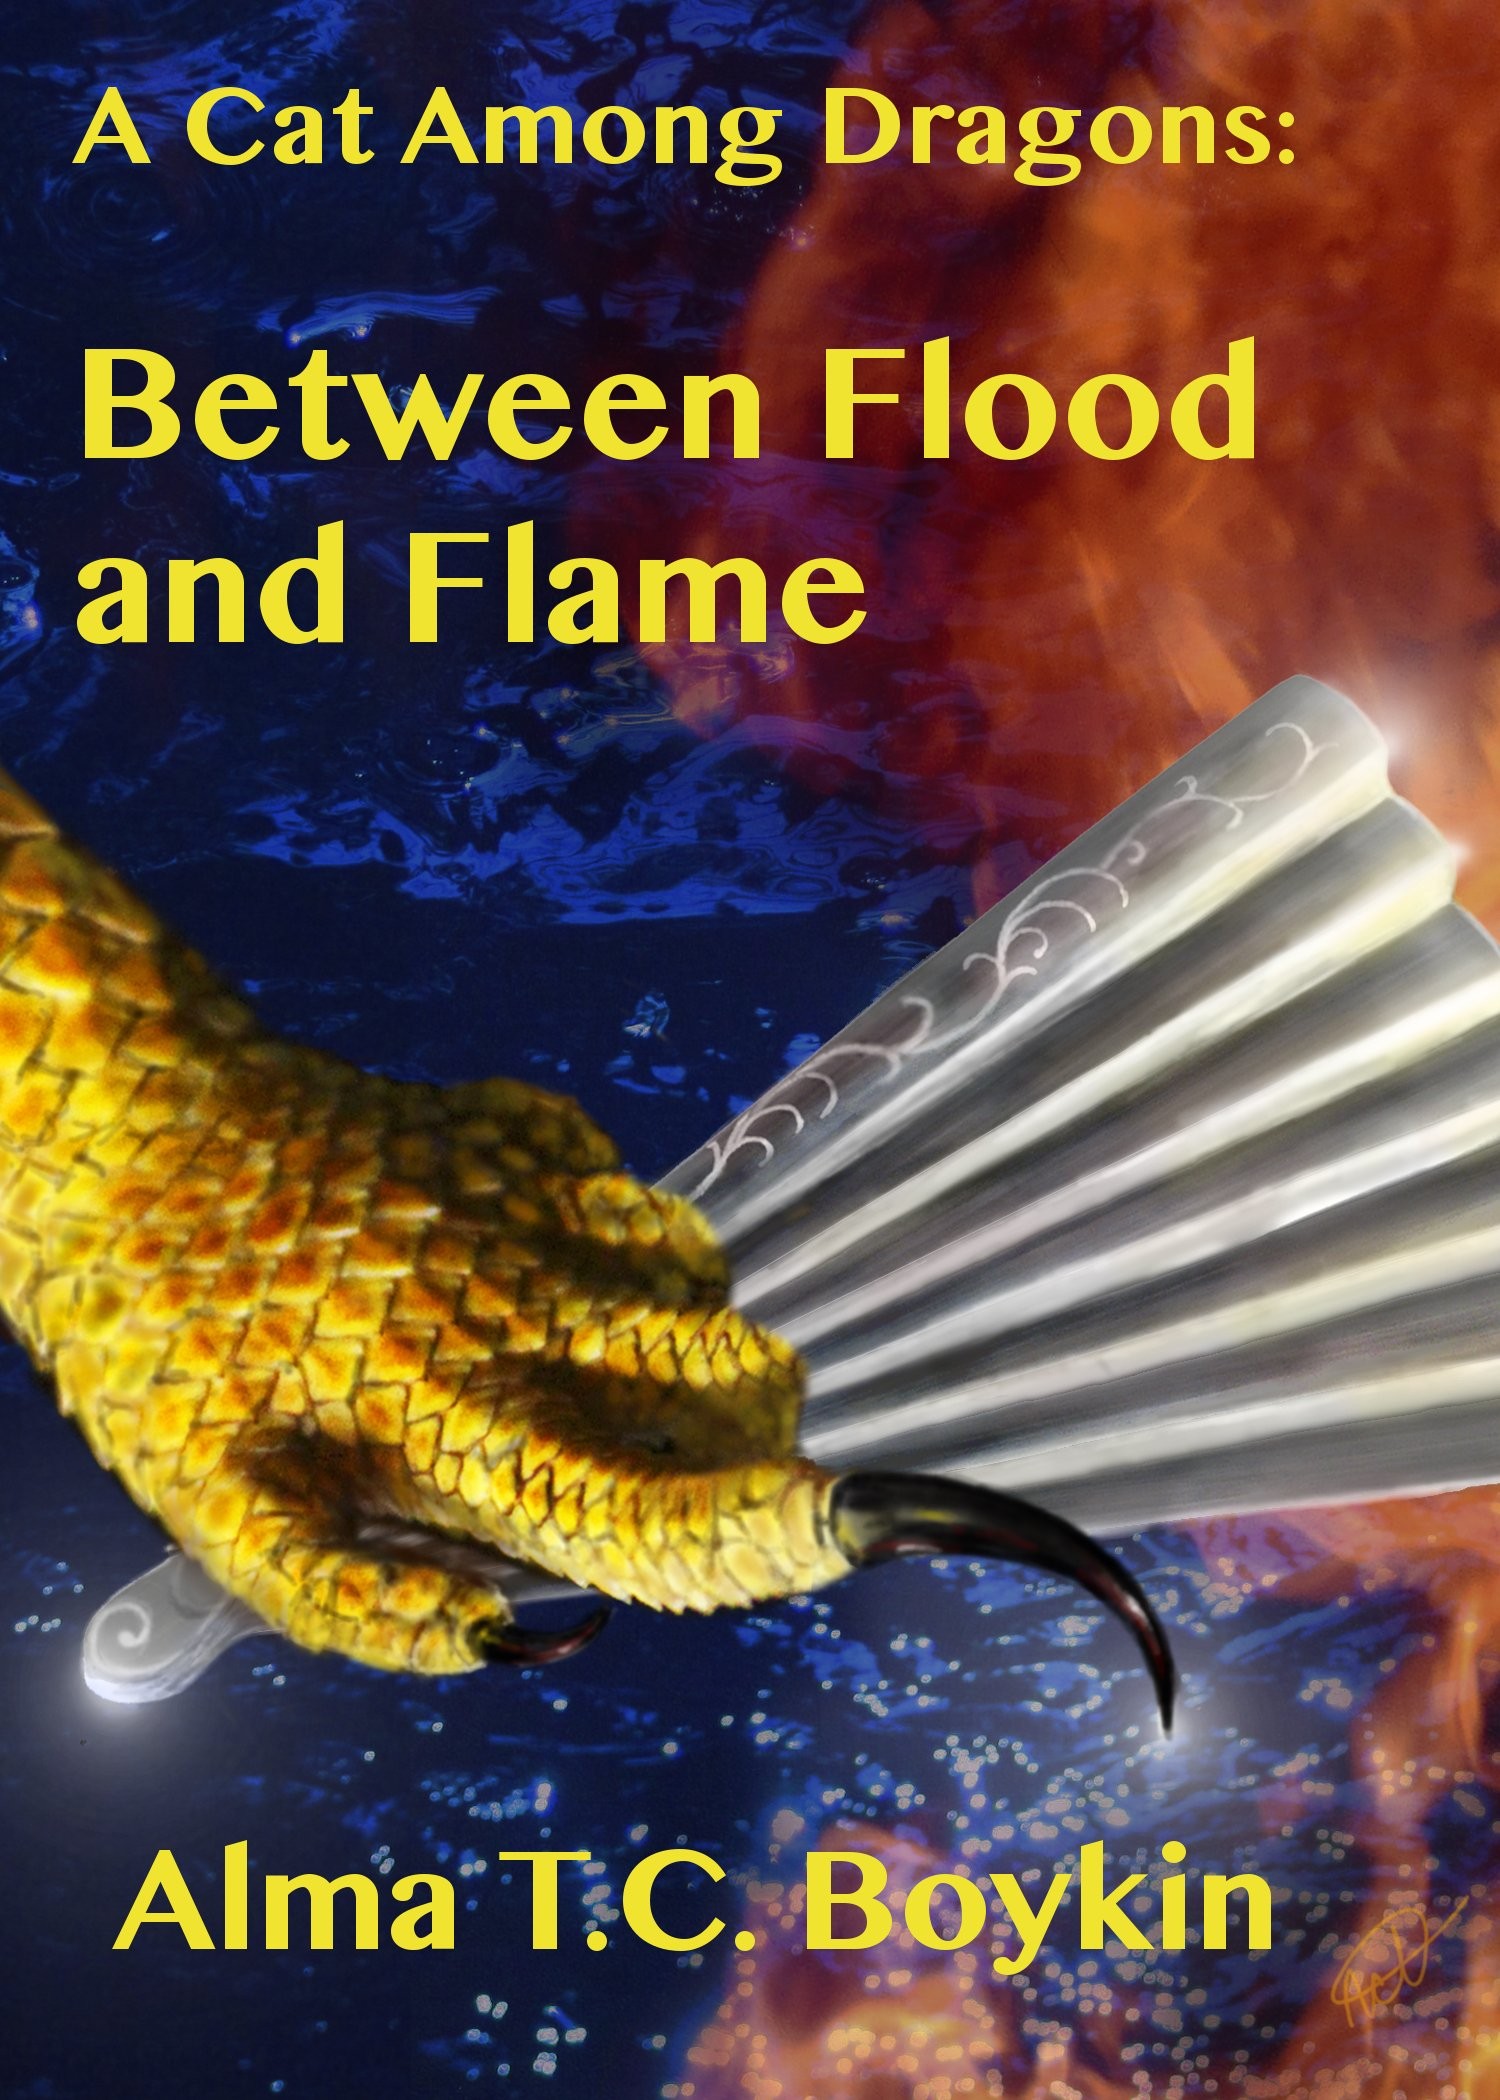 Between Flood and Flame